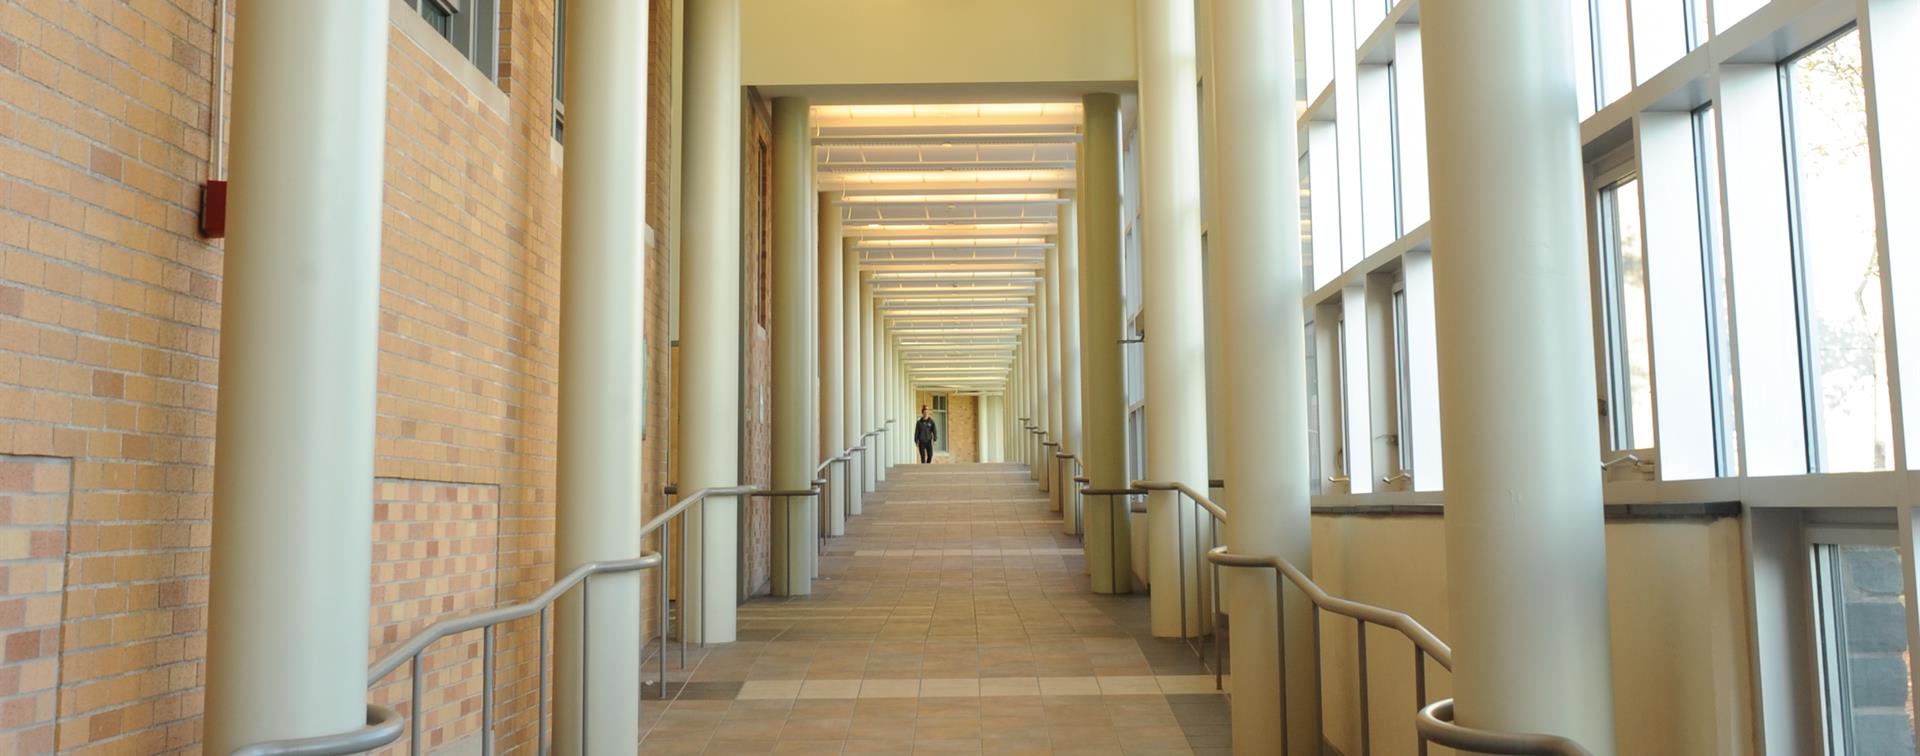 Picture of a hall lined with pillars. 